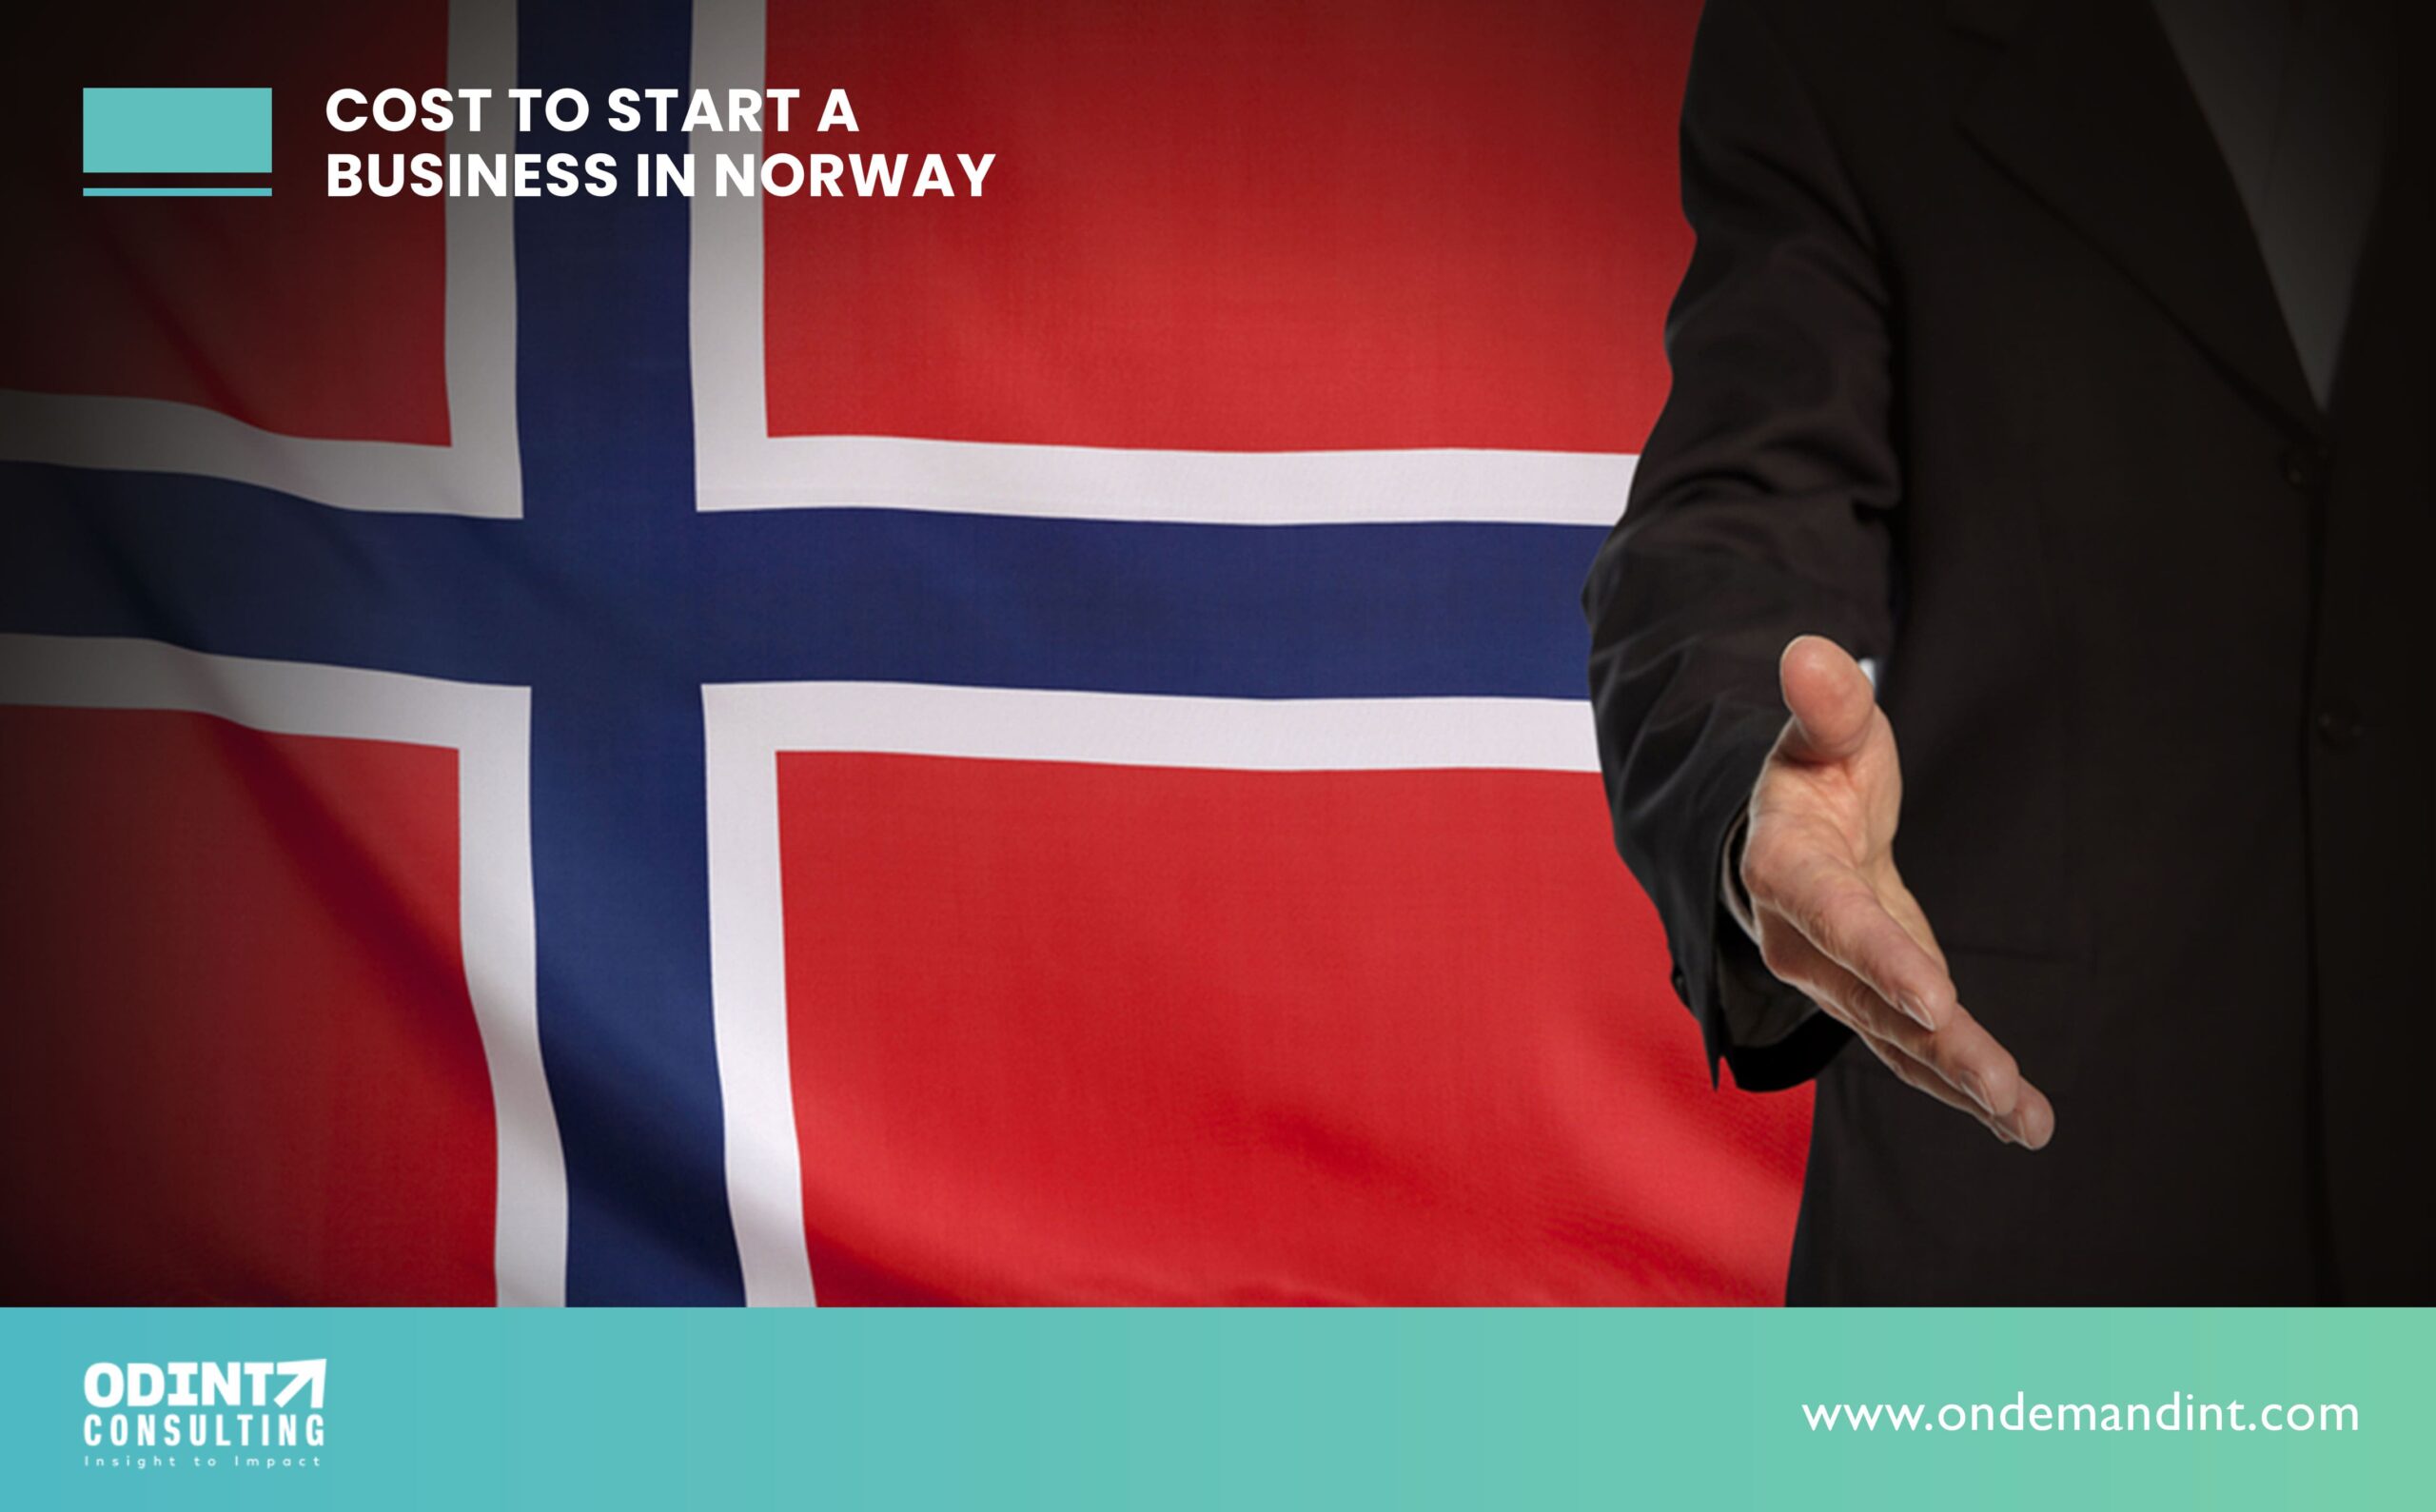 How Much Does It Cost To Start A Business In Norway?